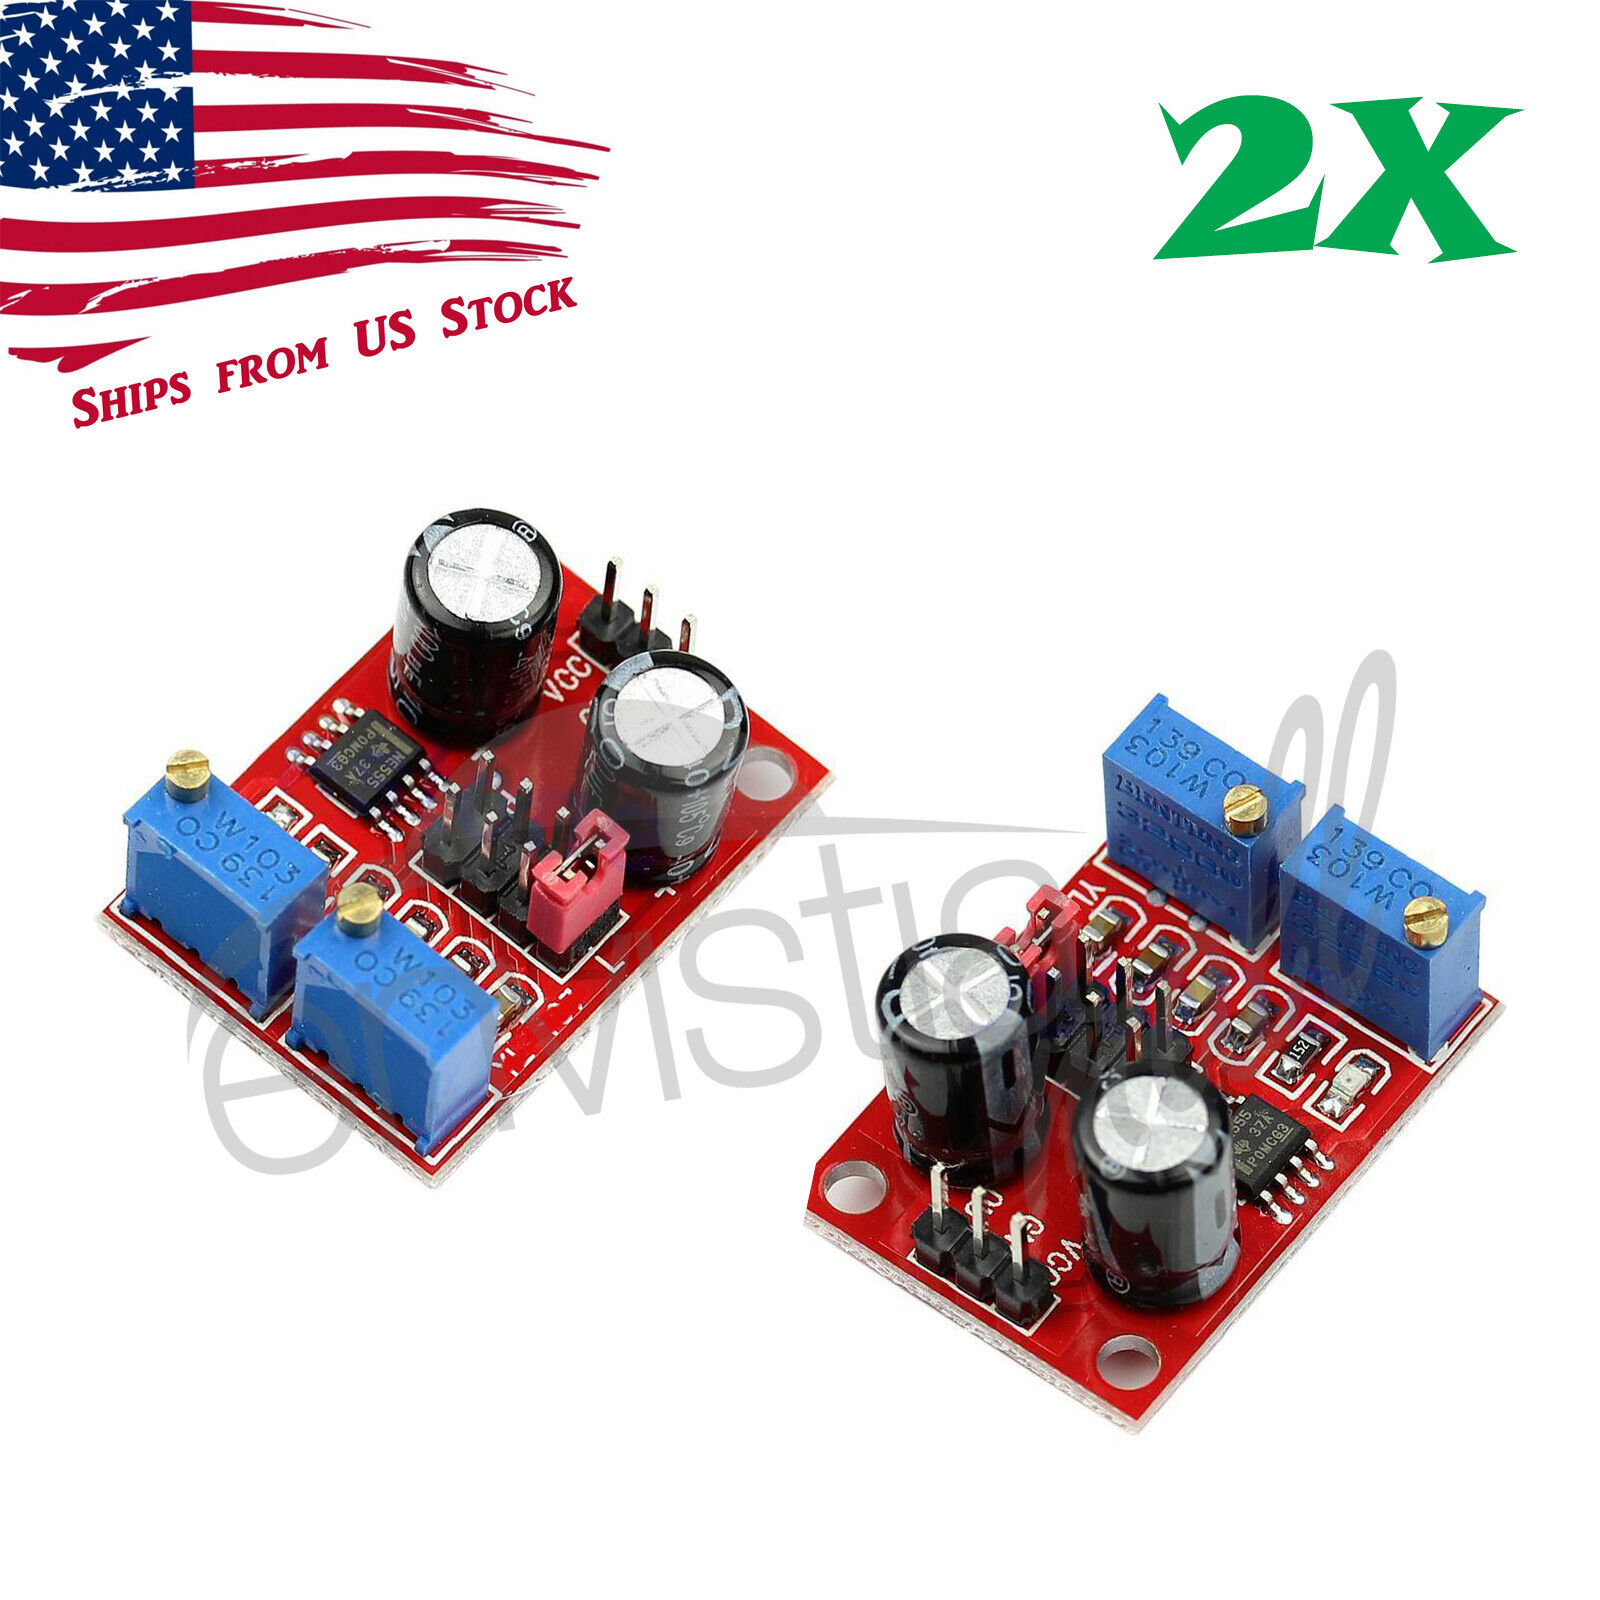 2Pcs NE555 Duty Cycle Pulse Frequency Adjustable Square Wave Generator Module 2X